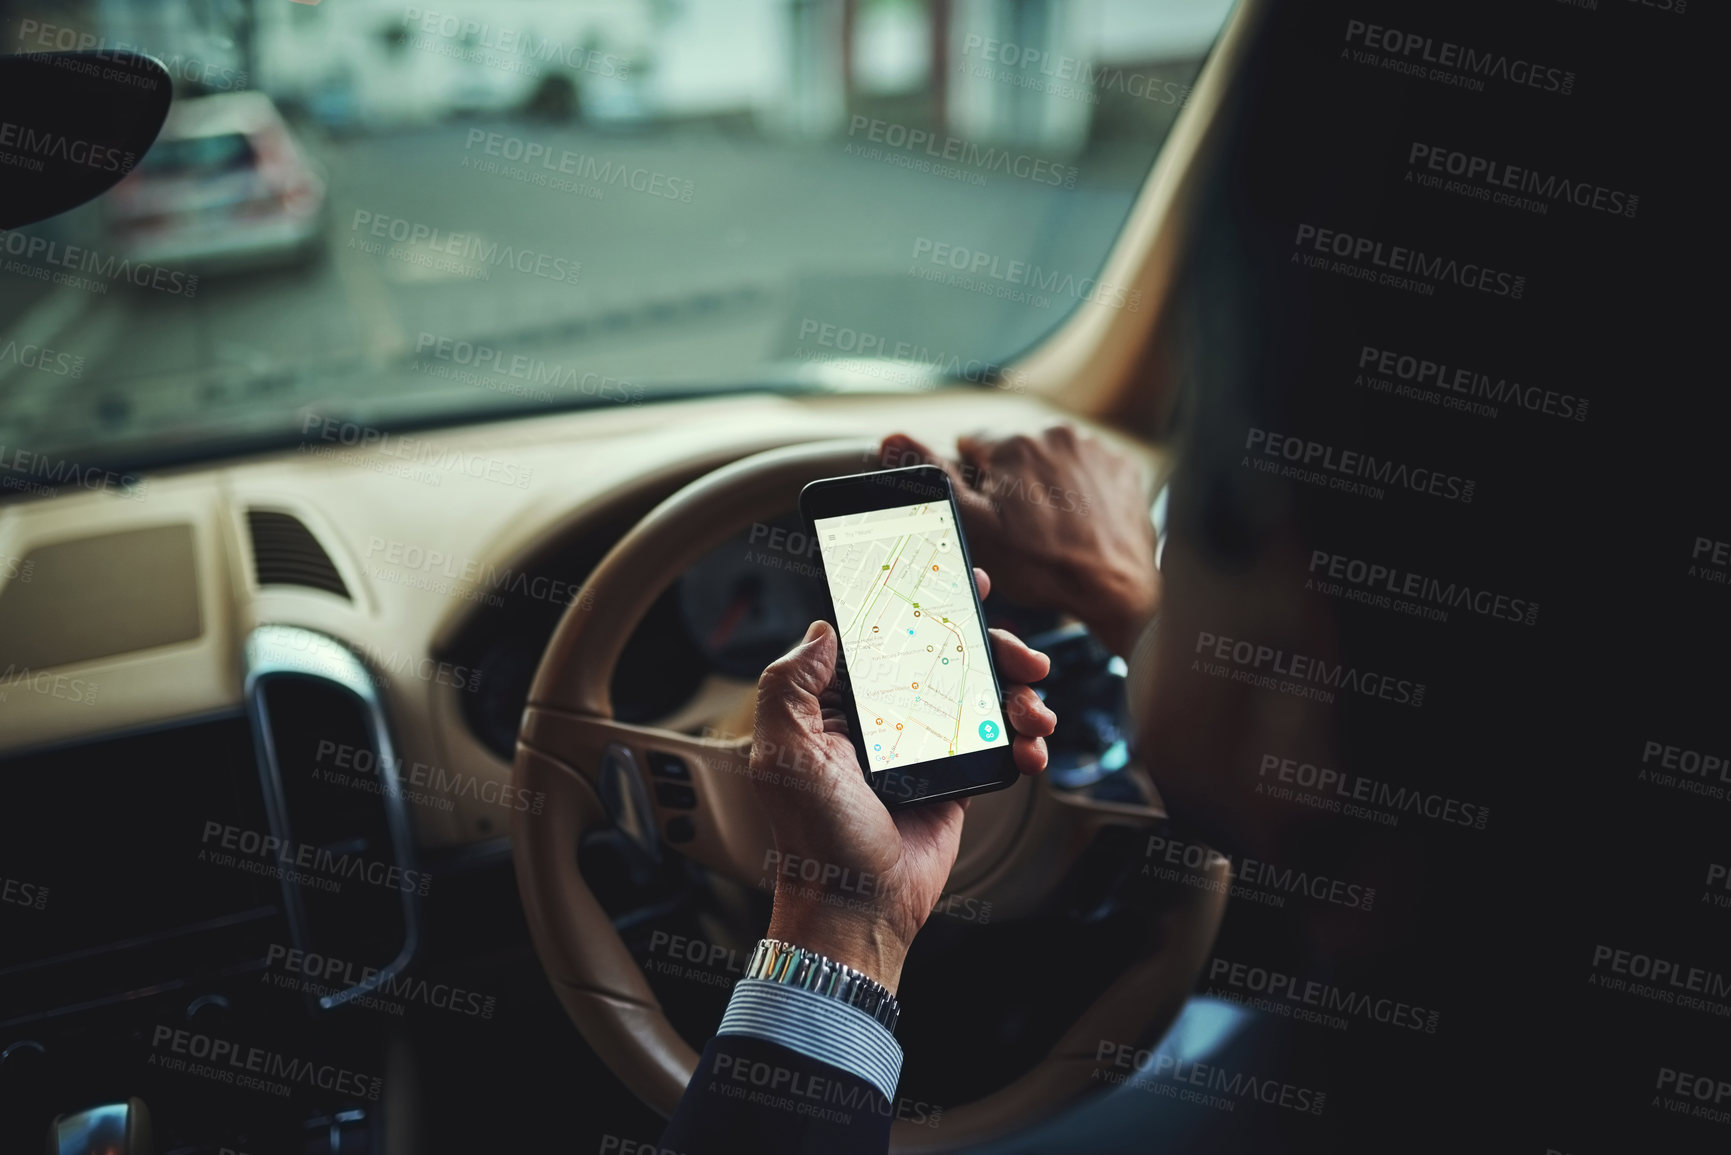 Buy stock photo Cropped shot of a businessman using his phone’s gps while driving a car